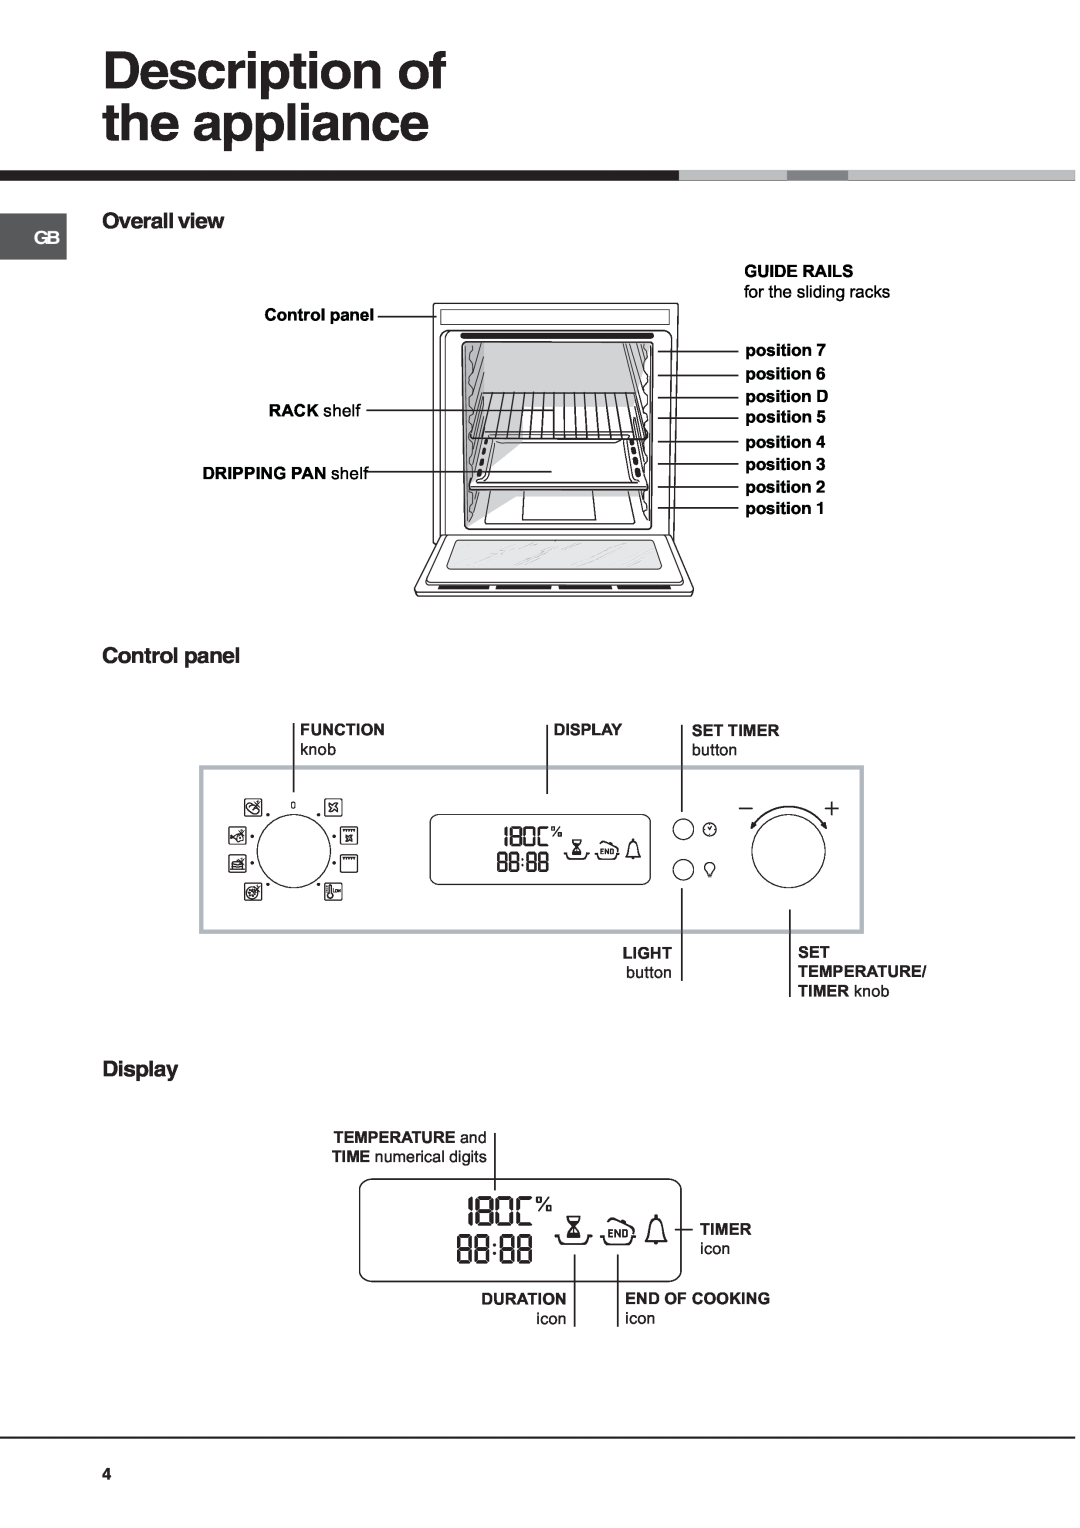 Hotpoint OS89IX, OS89CIX, OS89HP, OS89CHP Description of the appliance, Overall view, Control panel, Display 